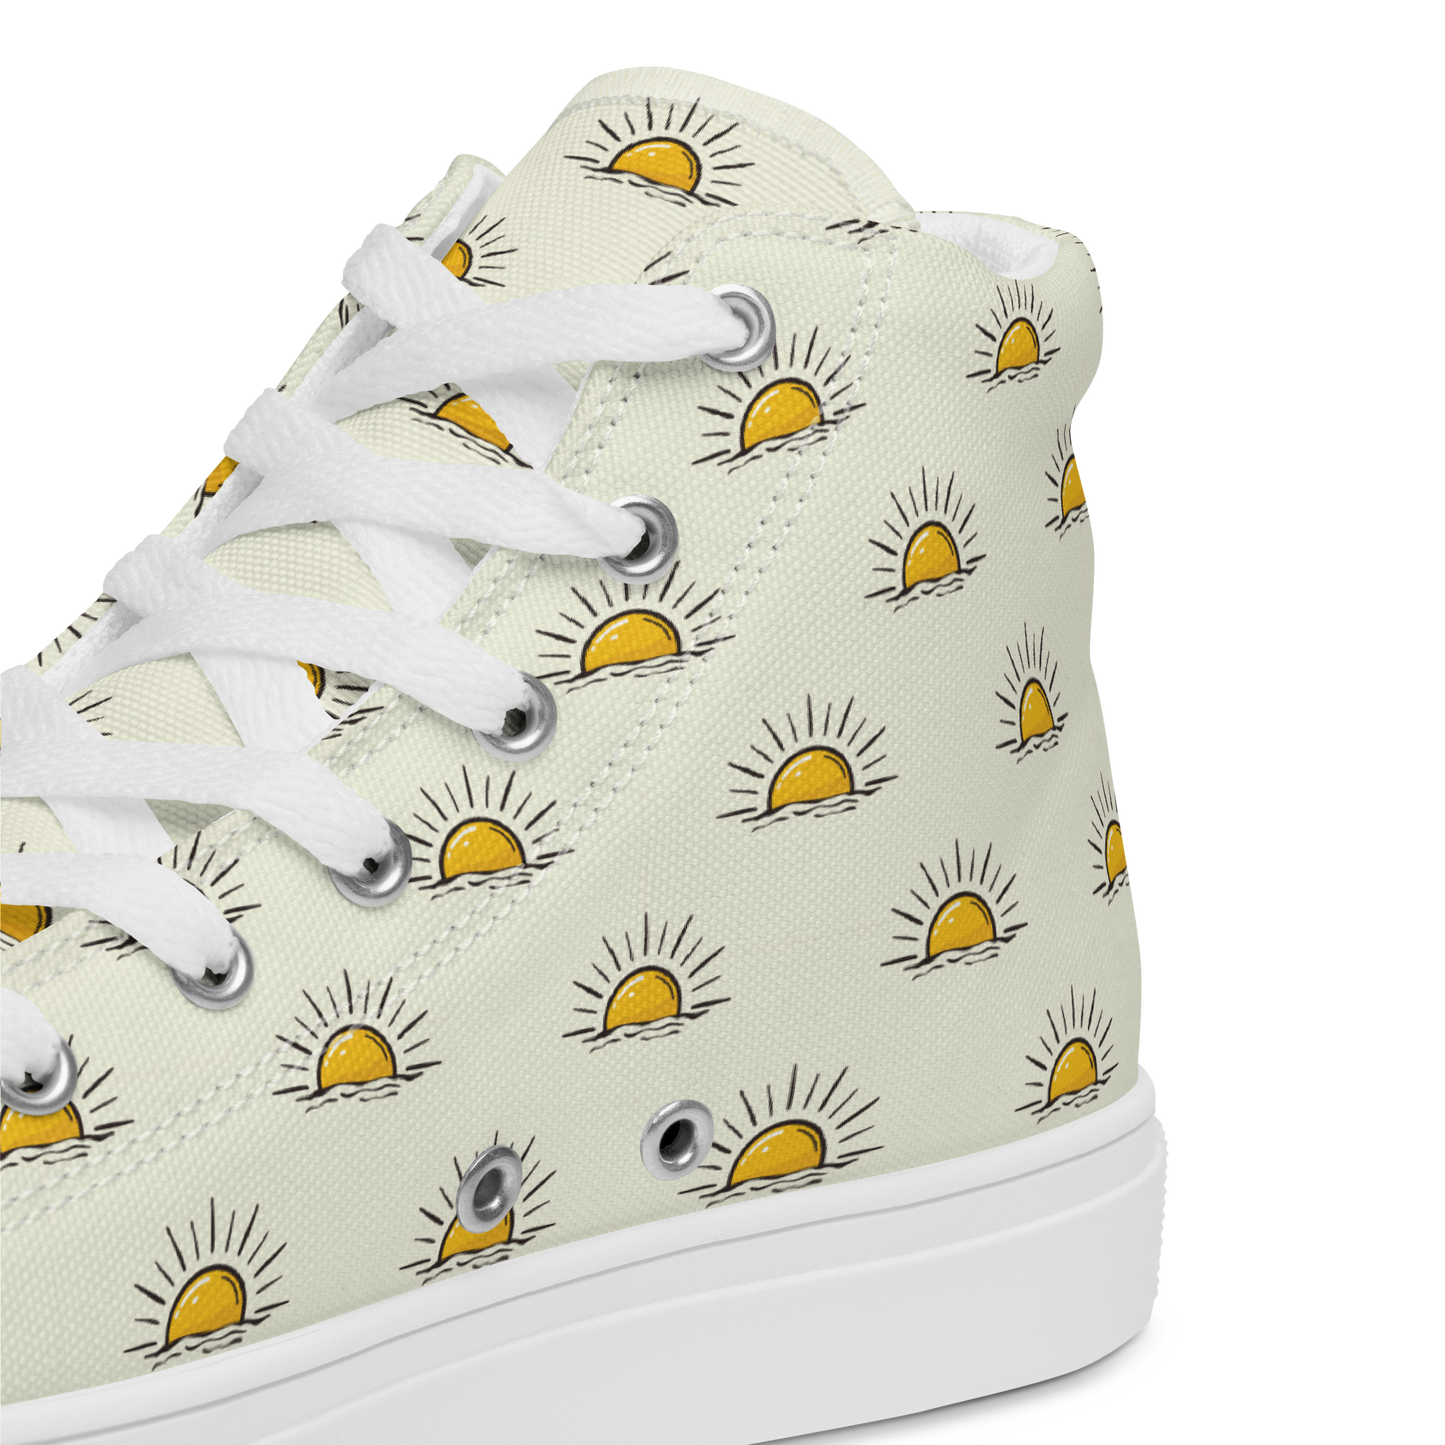 Sunny Side Up - Women’s High Tops